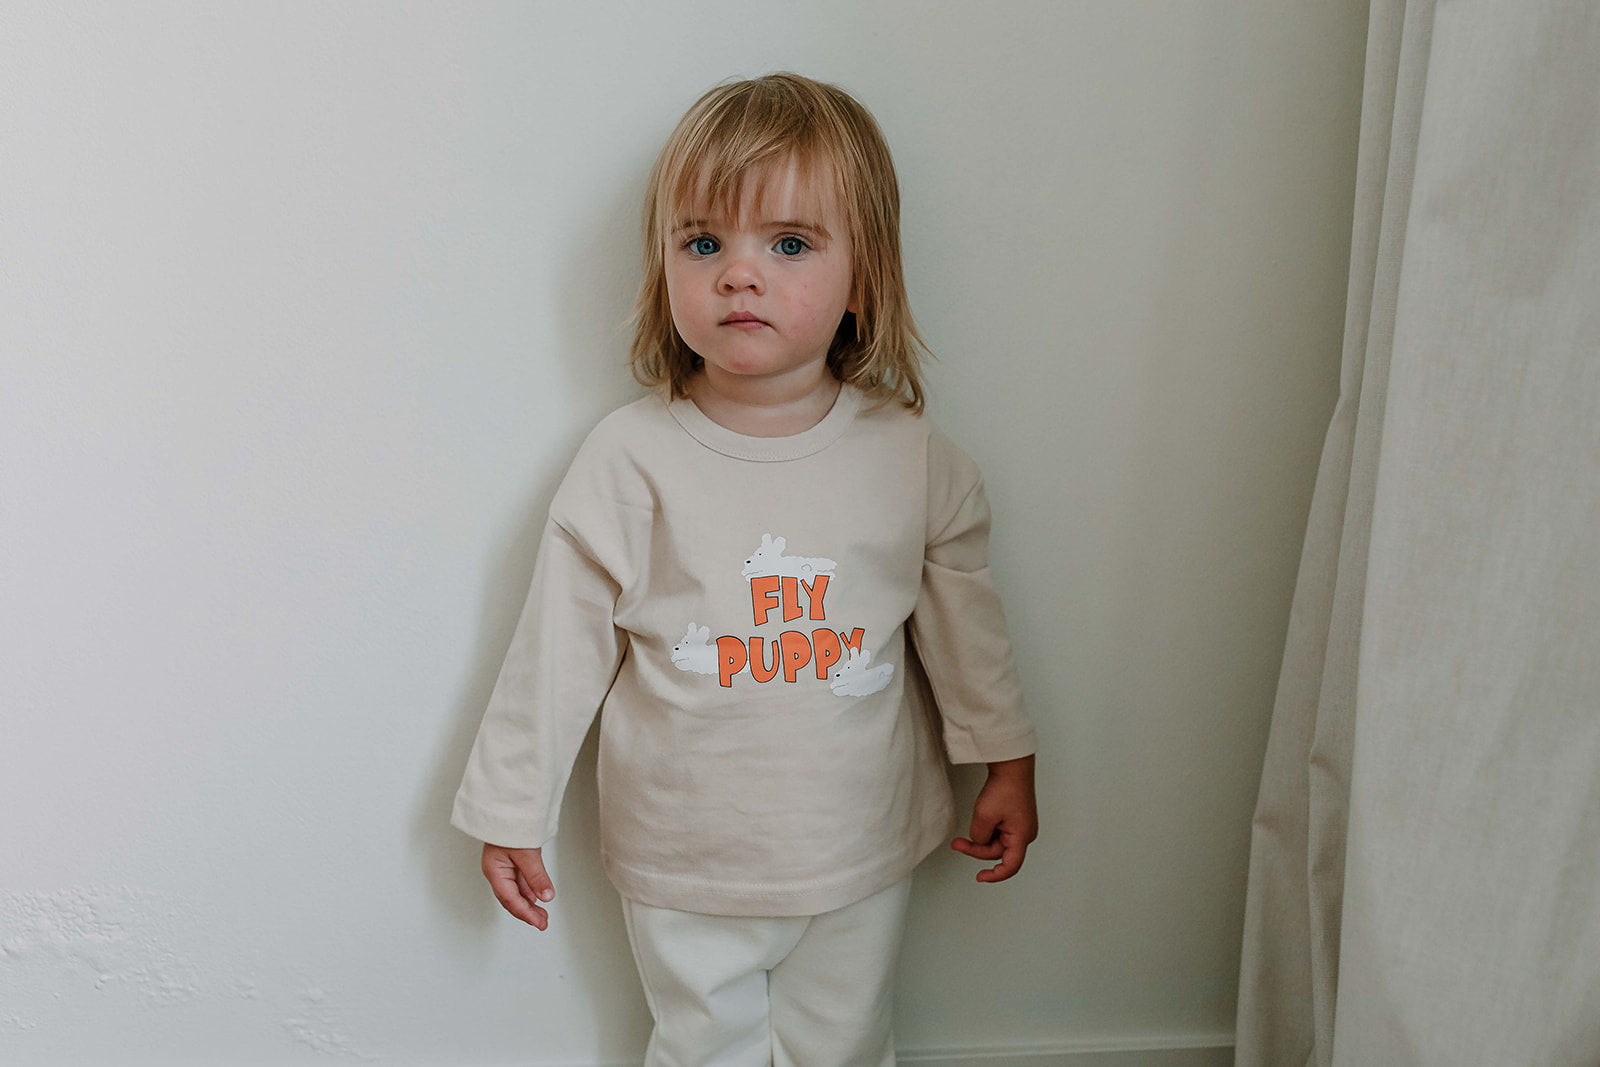 Fly puppy tee